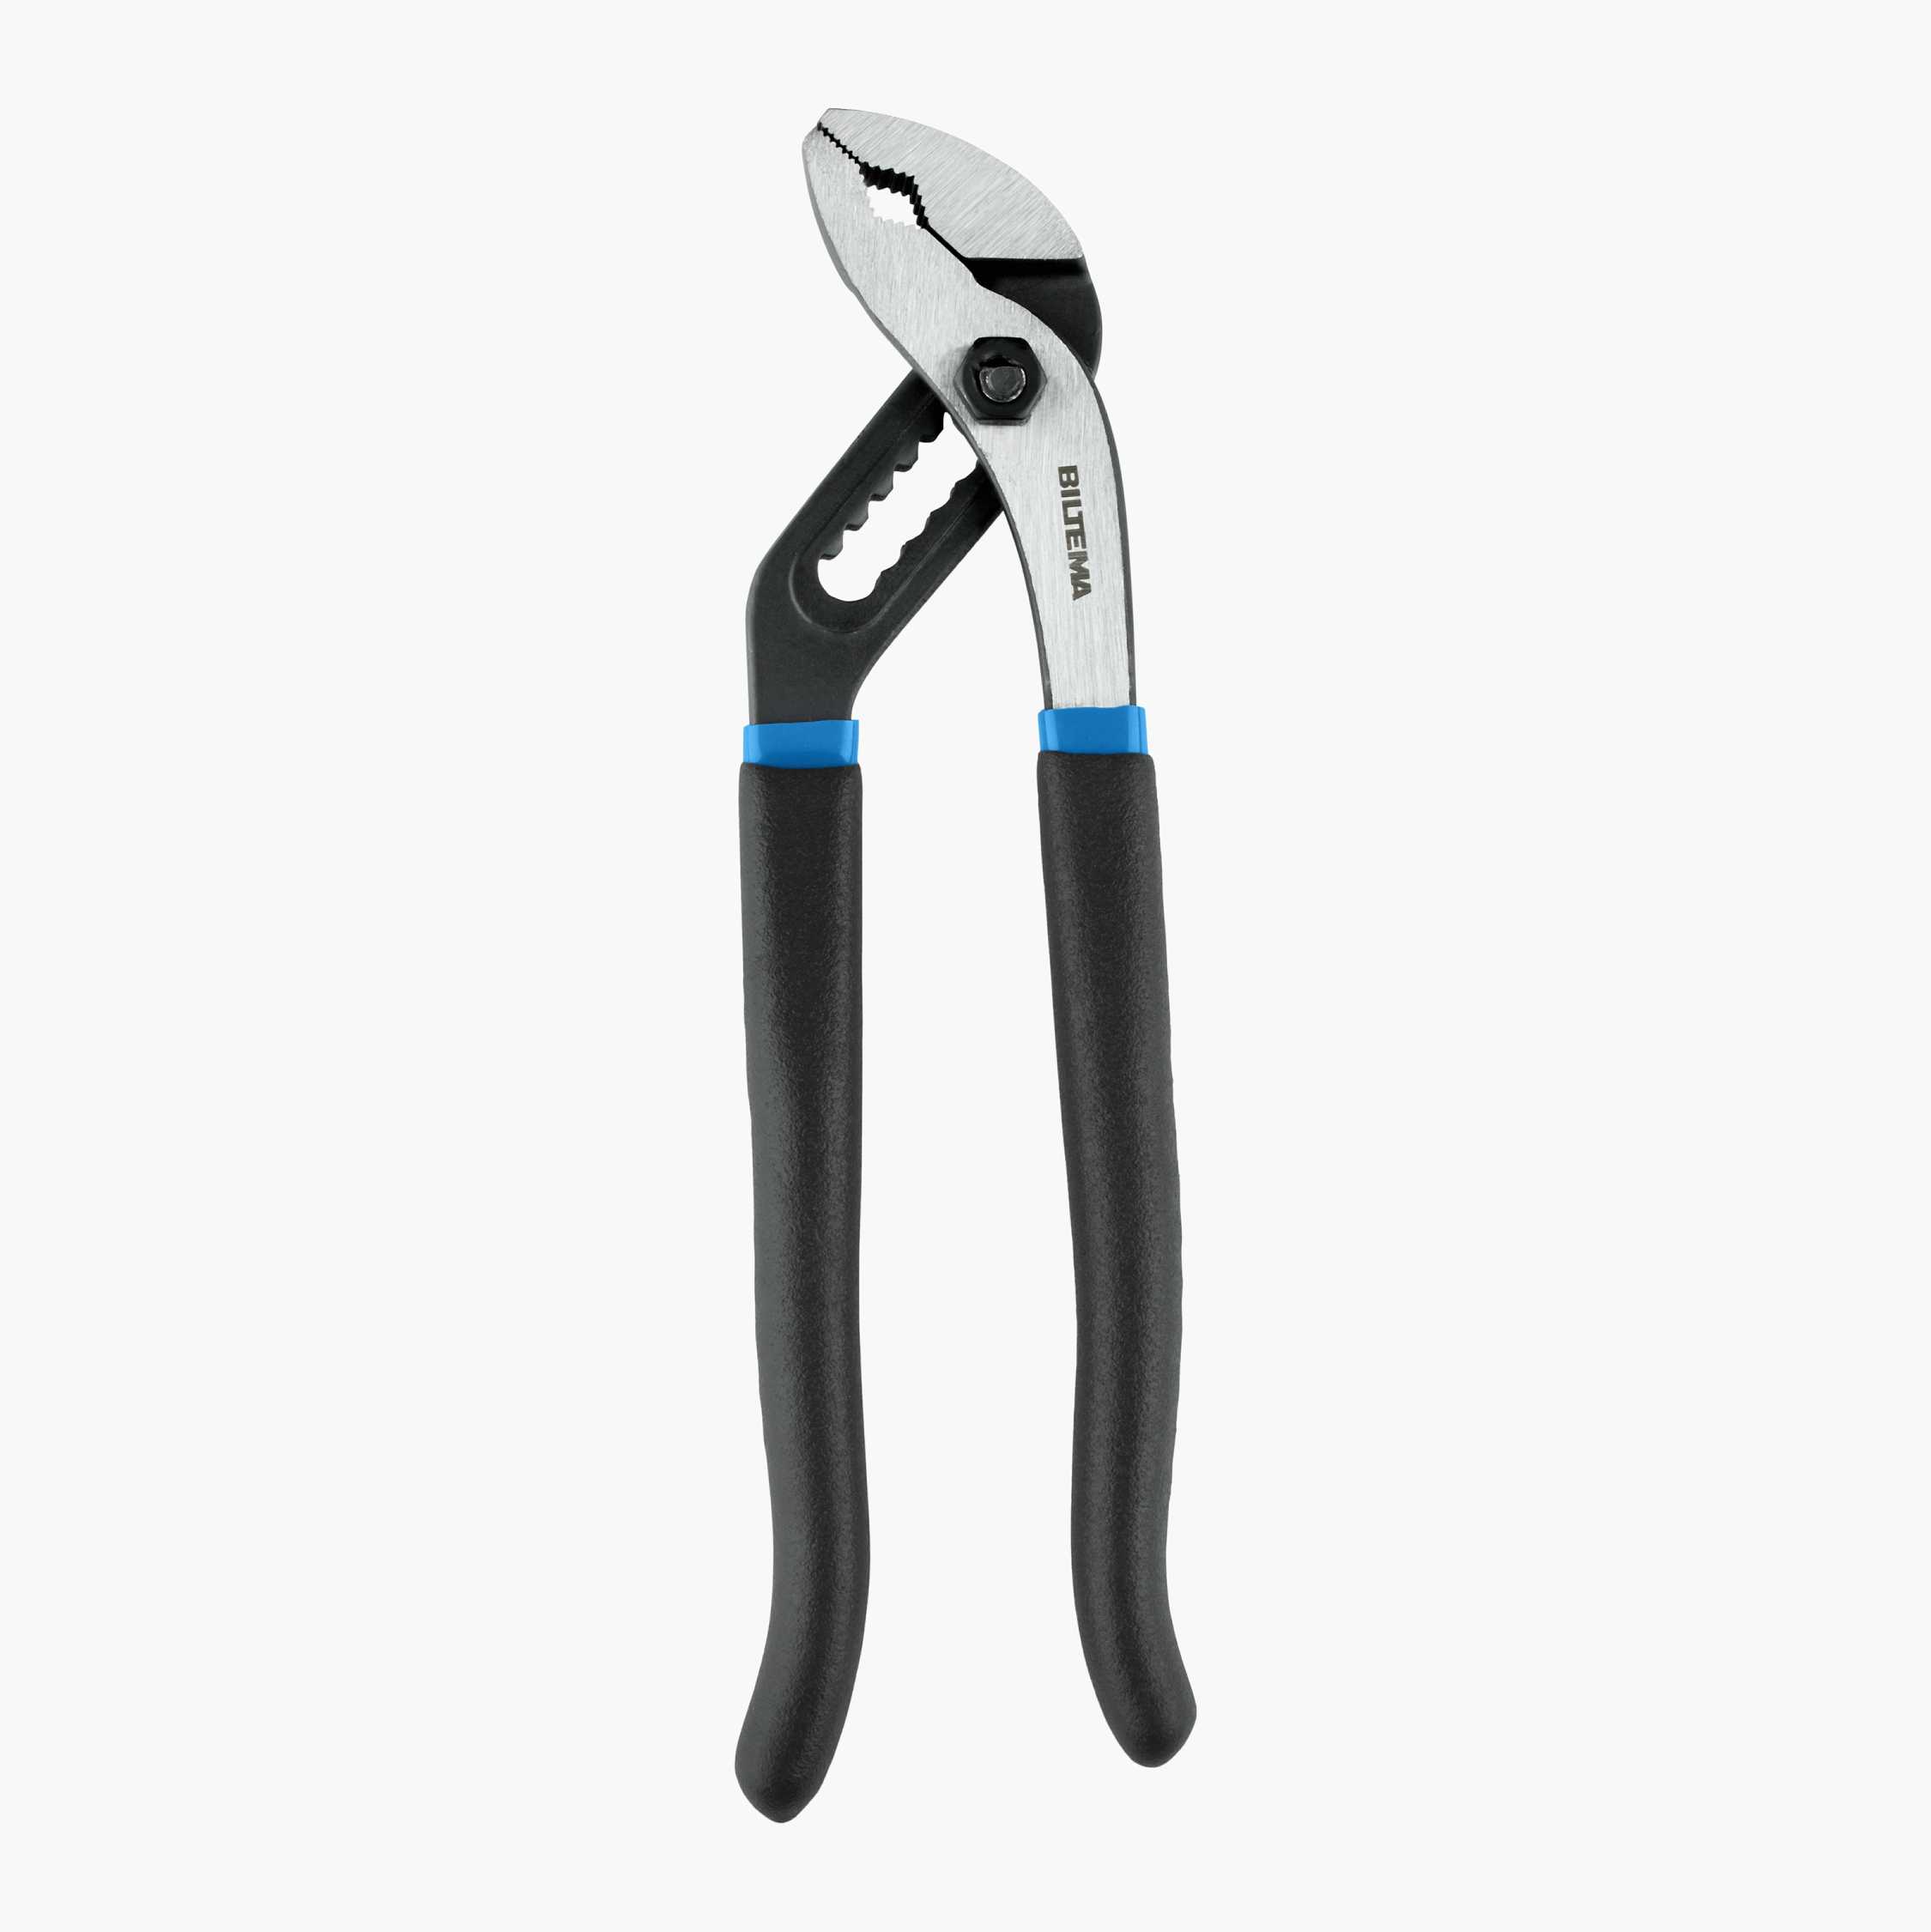 Tongue-and-groove pliers, 125 mm 